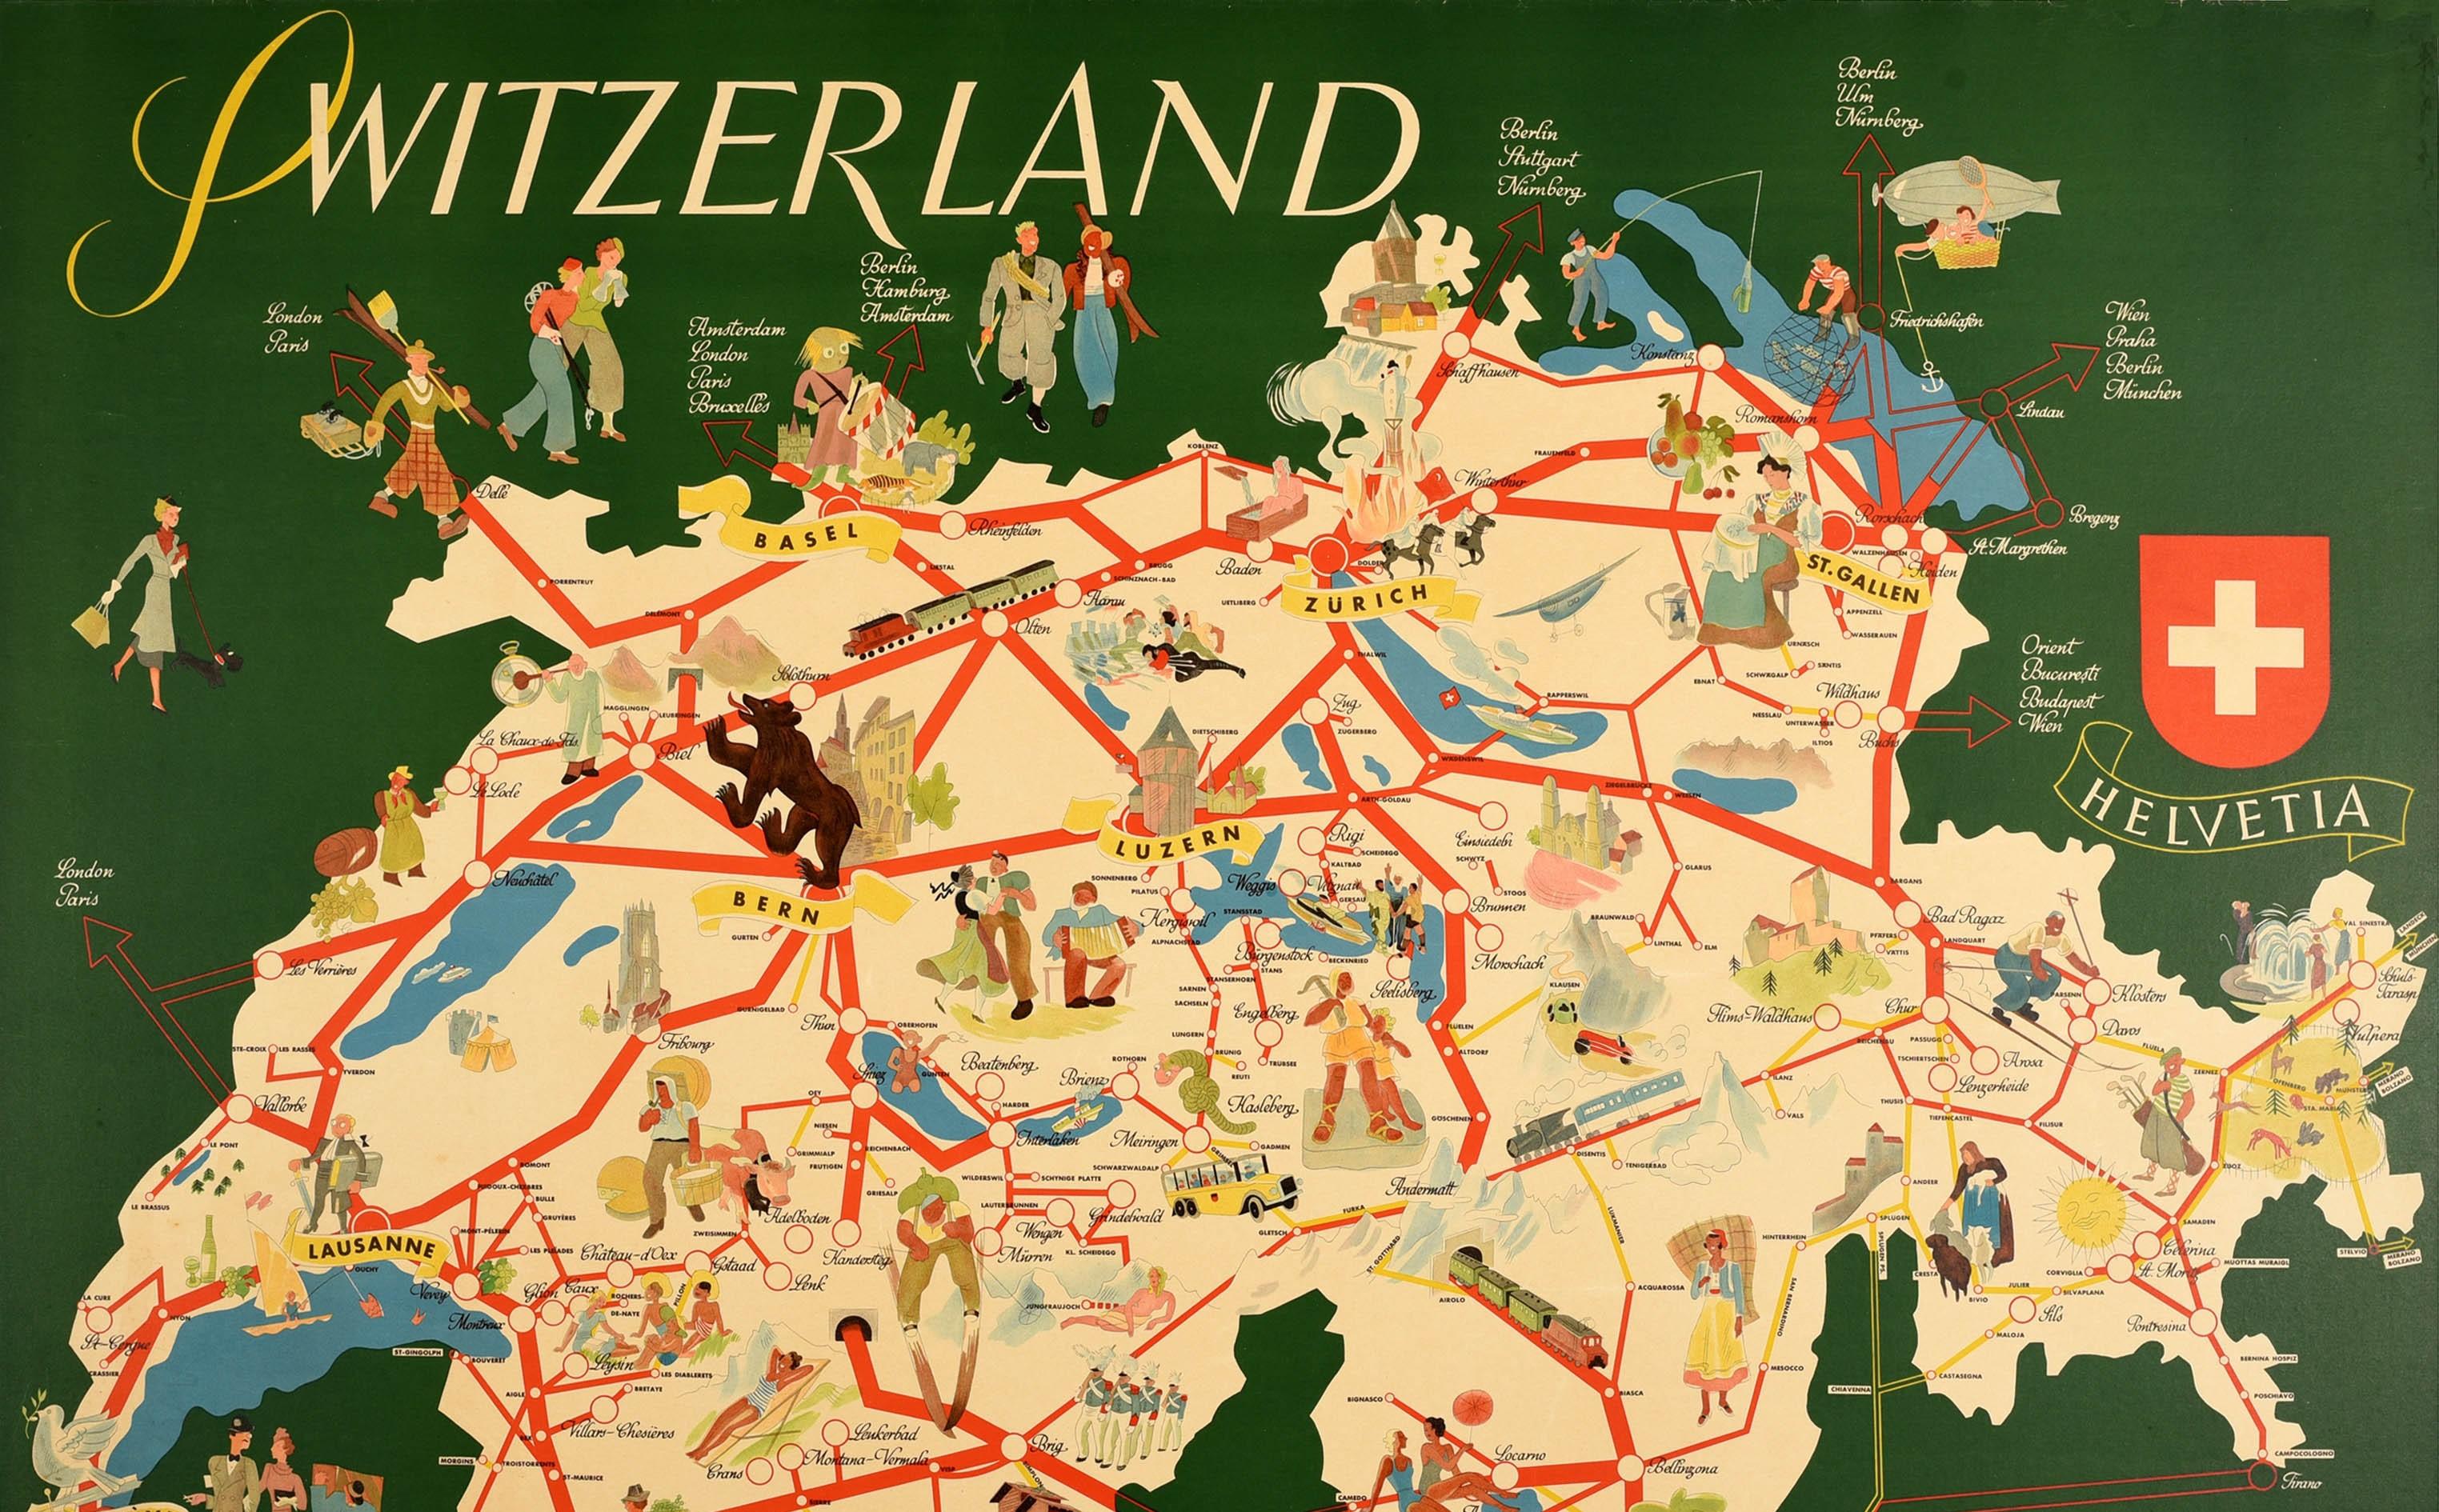 Original vintage travel poster featuring a pictorial map of Switzerland showing trains on the route lines through the country with colourful images of places, summer and winter sport and other activities including people skiing and mountain